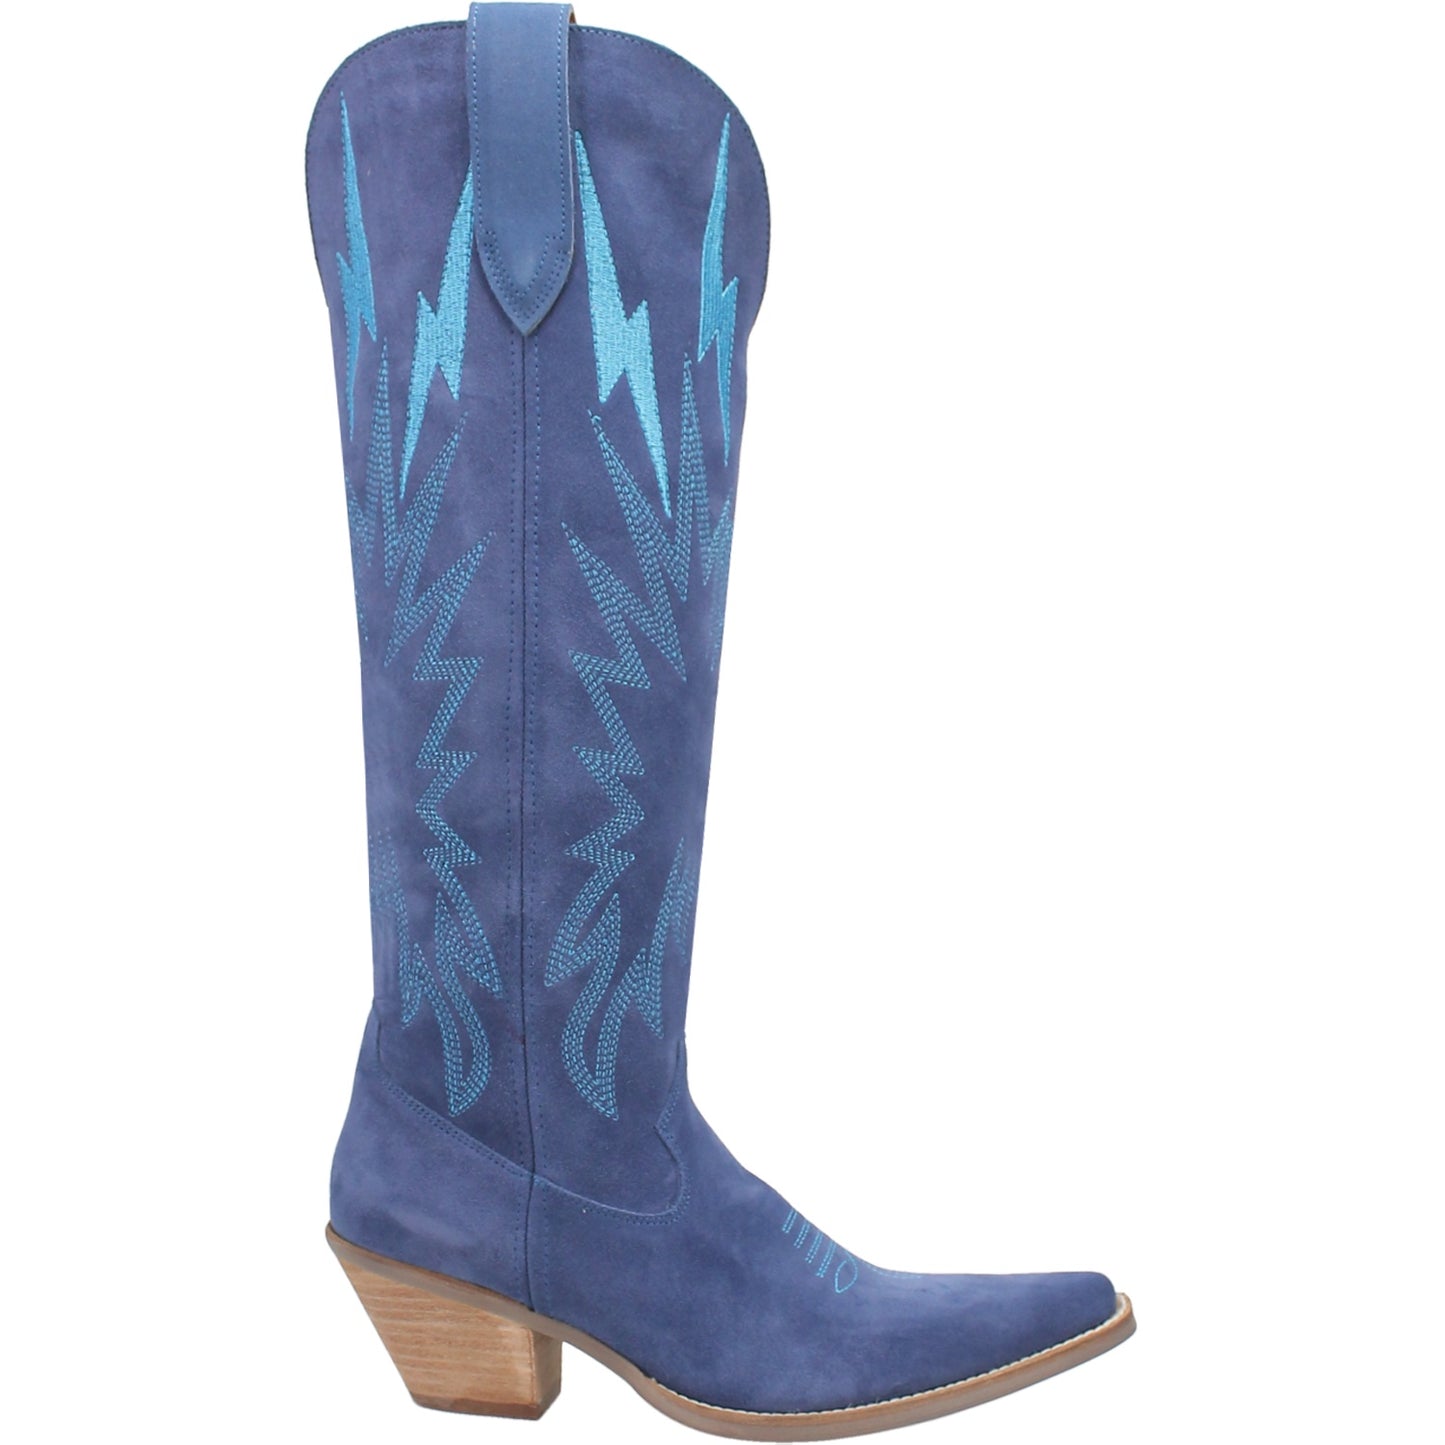 THUNDER ROAD BLUE BOOTS